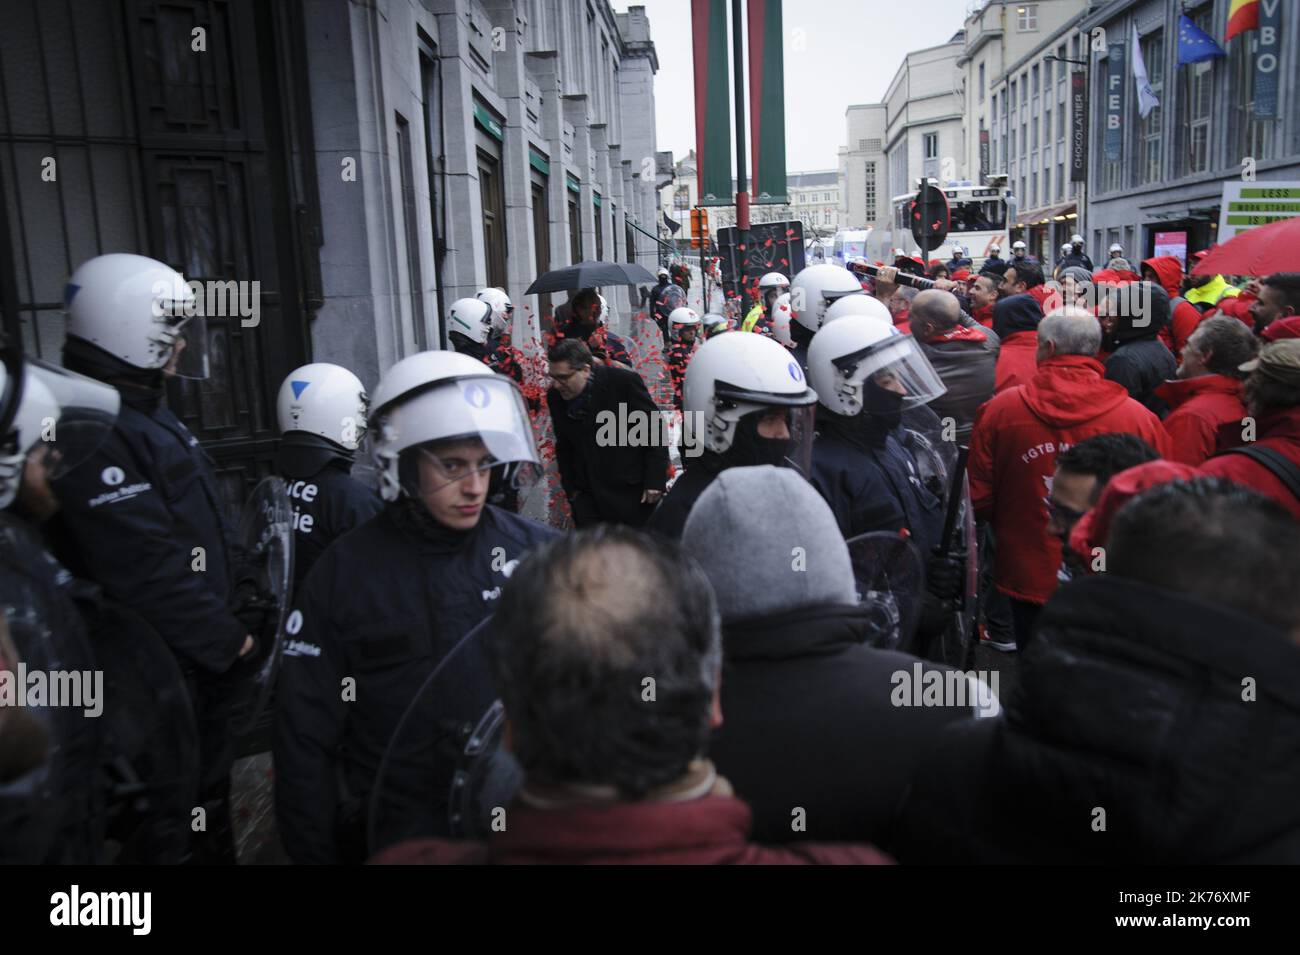 Various union branches (FGTB metal, FGTB, CSC, ...) called to protest outside the doors of BOZAR during the holding of the electoral forum of the Federation of Enterprises of Belgium (FEB) where were also to intervene the various party leaders of Belgium . Stock Photo